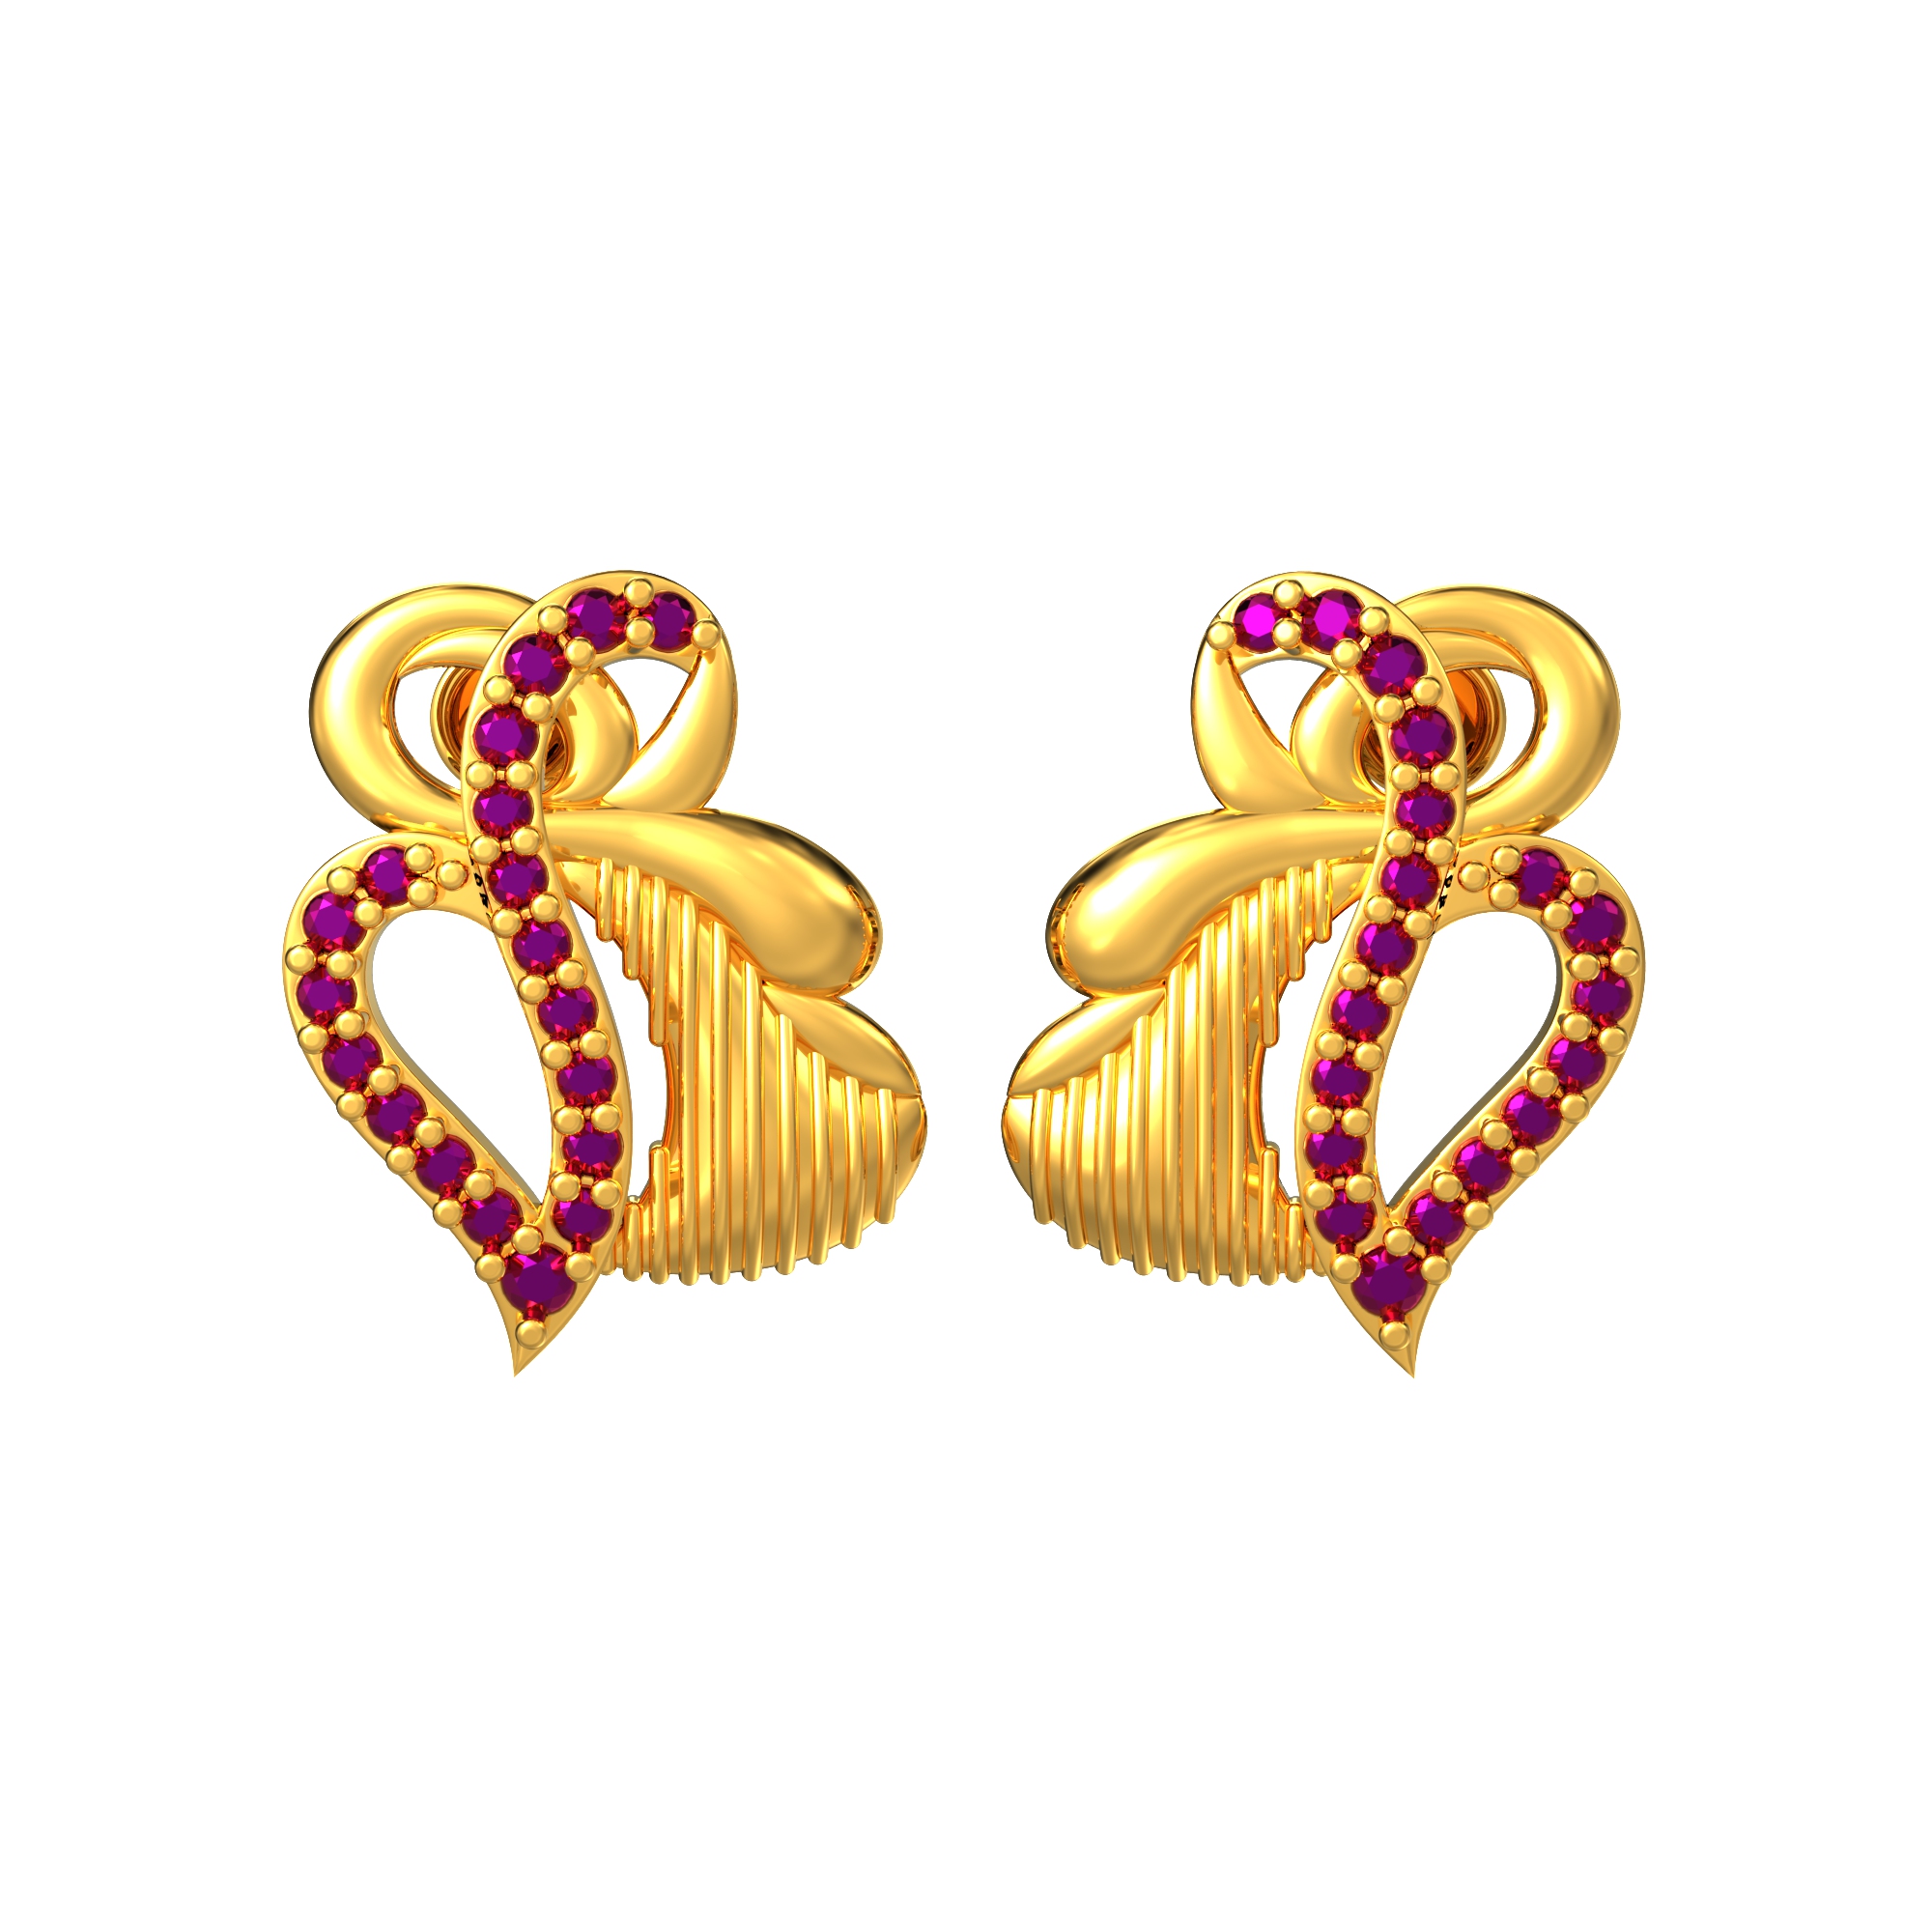 Gleaming Curve Design Gold Earrings